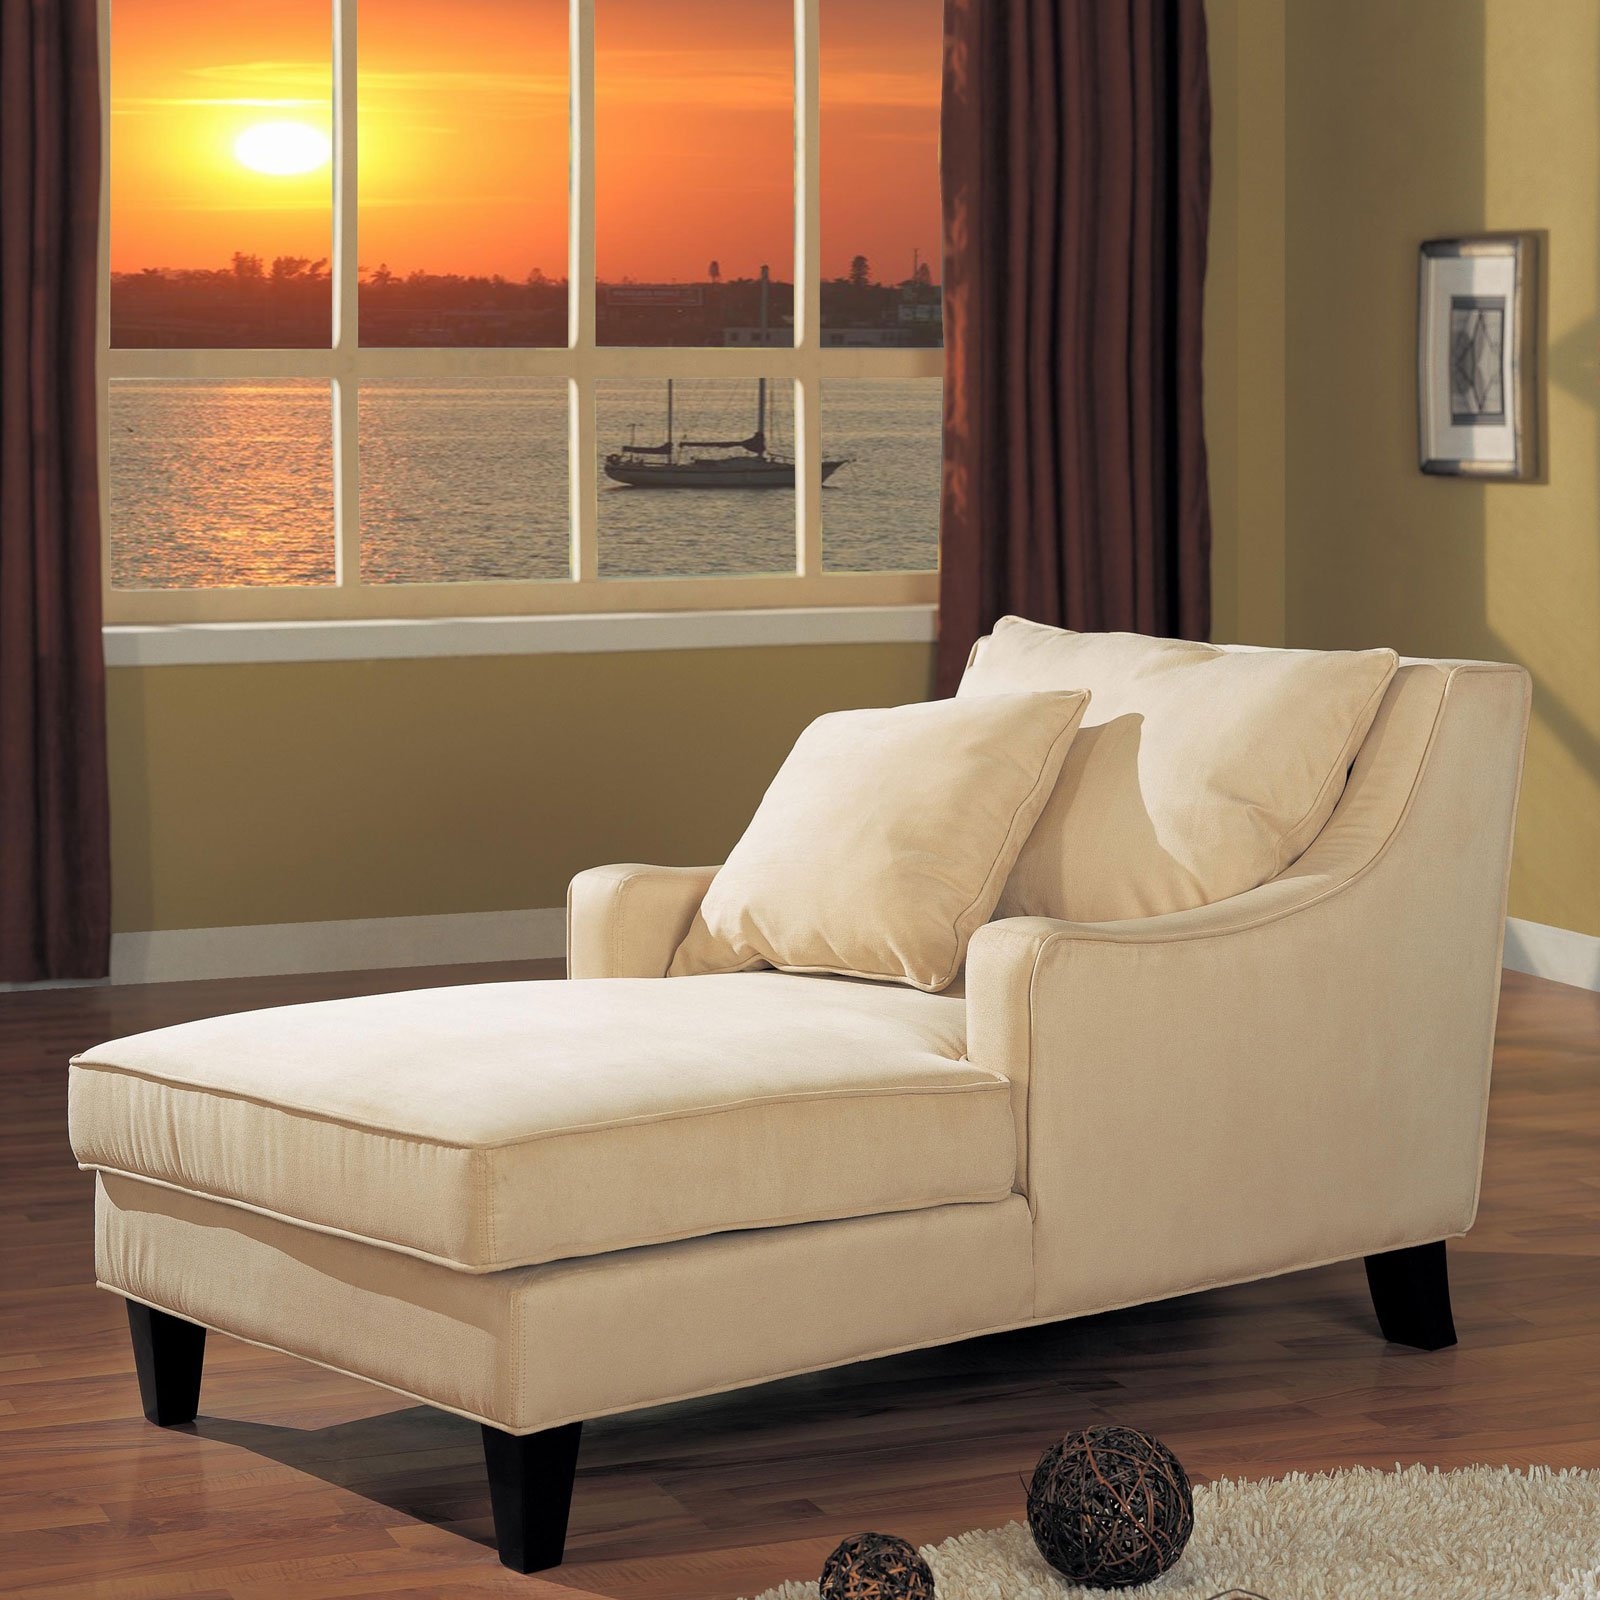 Chaise Lounge Chairs For Living Room 5 